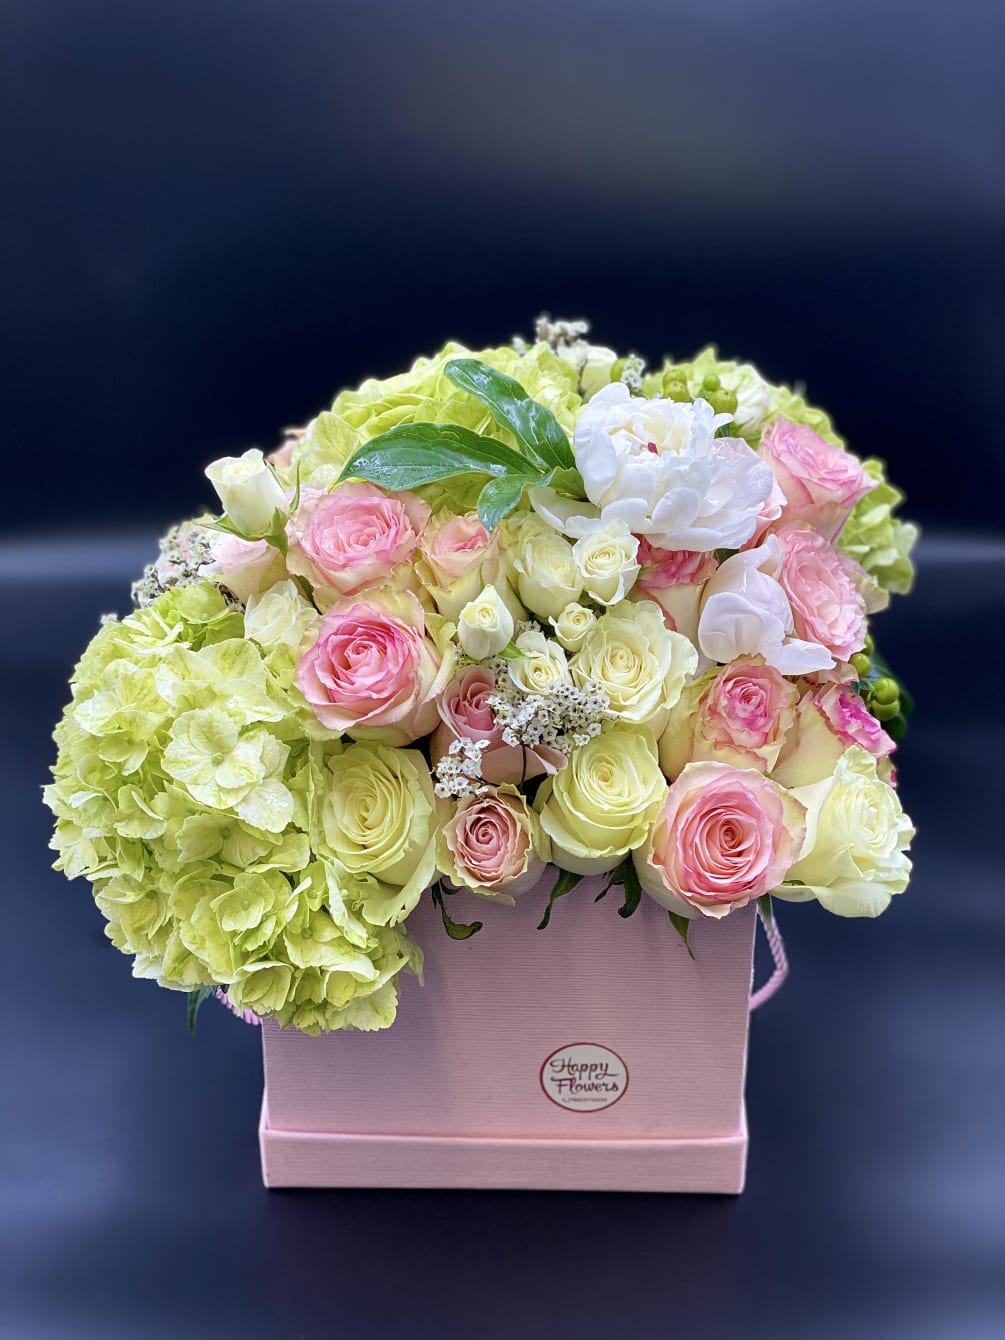 Delicate mix of colors in a combination of pink and white tones.